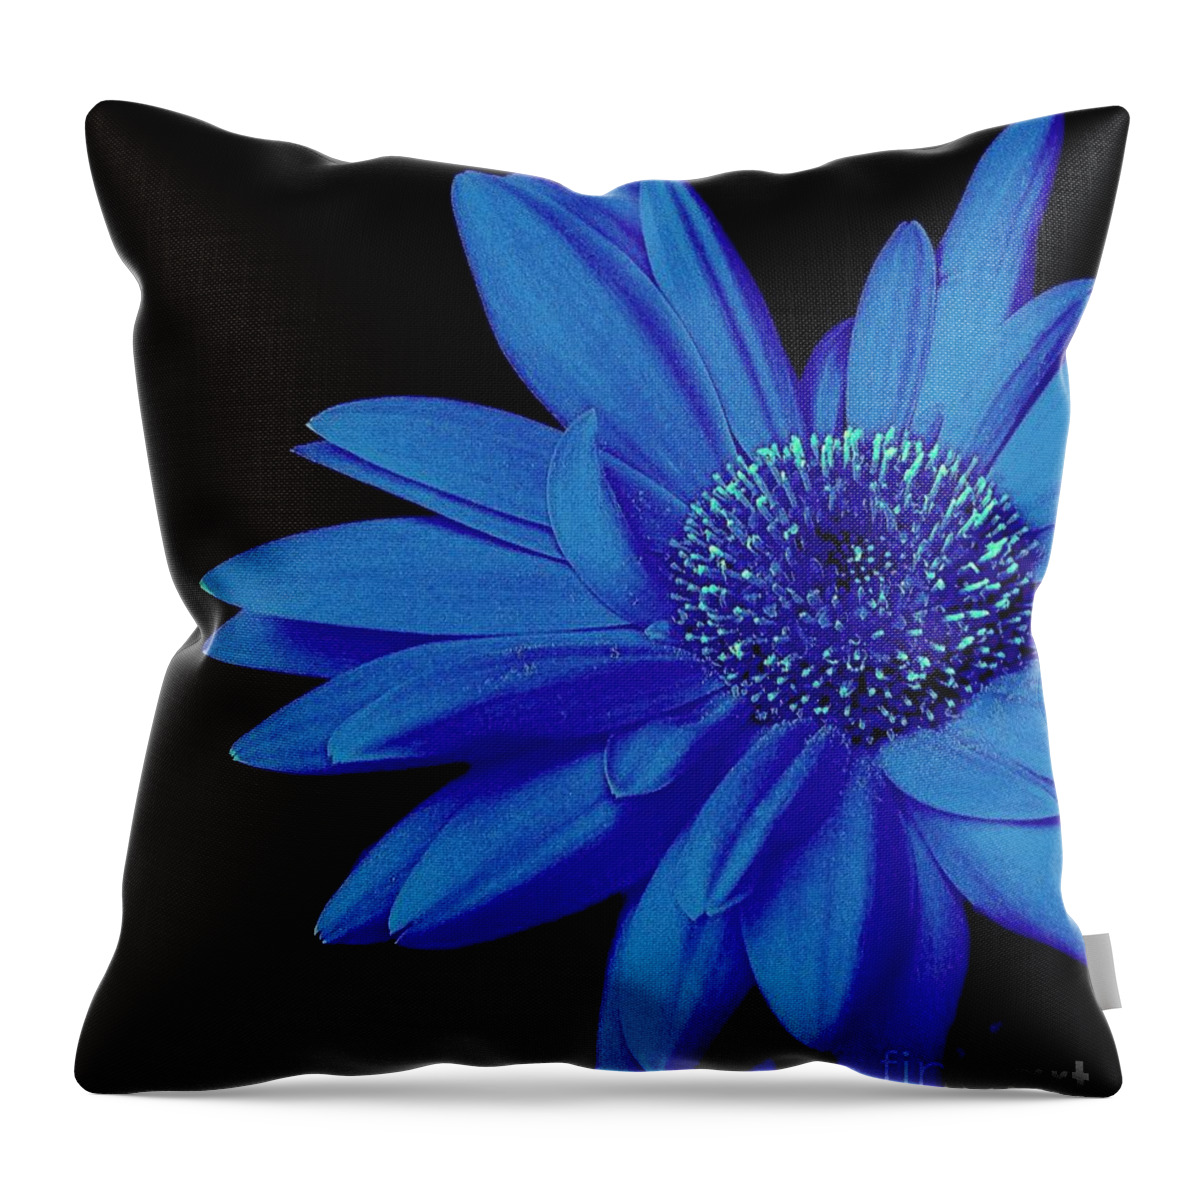 Blue Throw Pillow featuring the photograph Blue by Elfriede Fulda